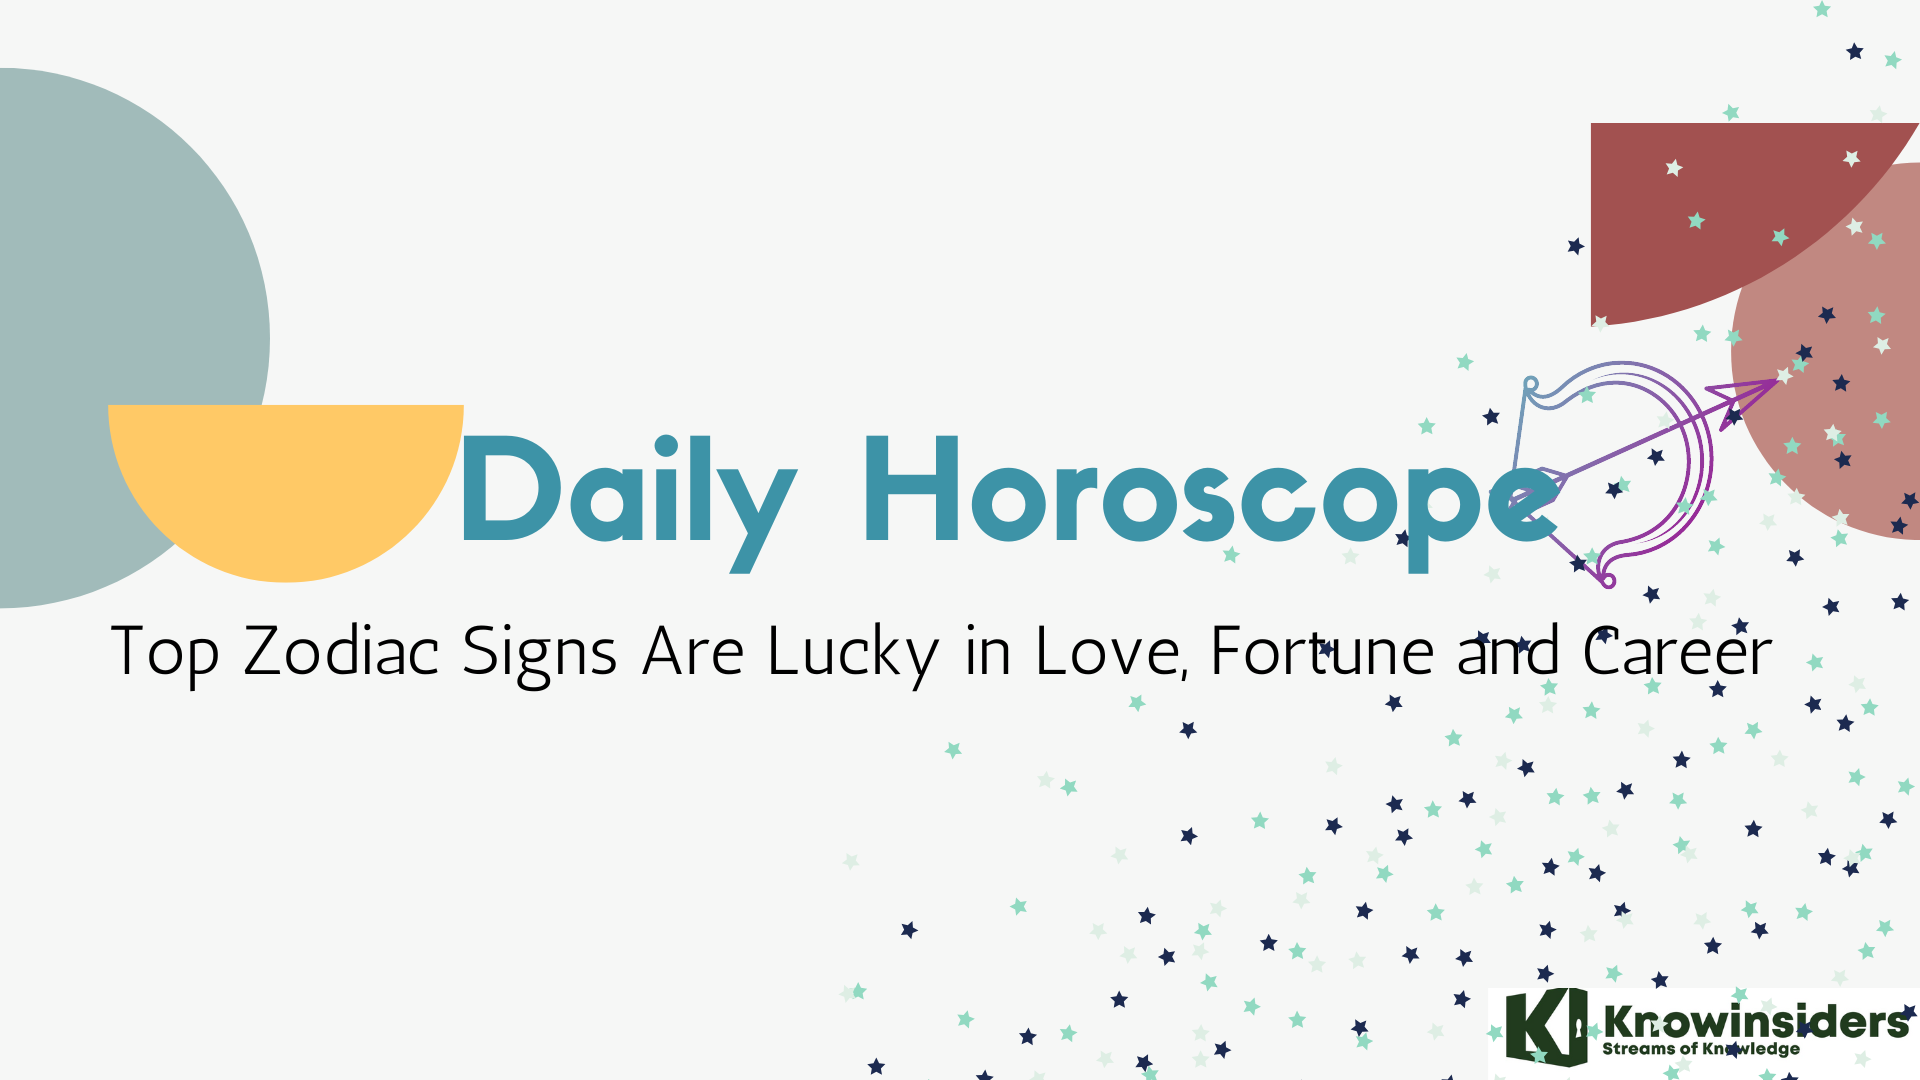 Daily Horoscope (June 17, 2022): Top Zodiac Signs Are Lucky in Love, Money and Job